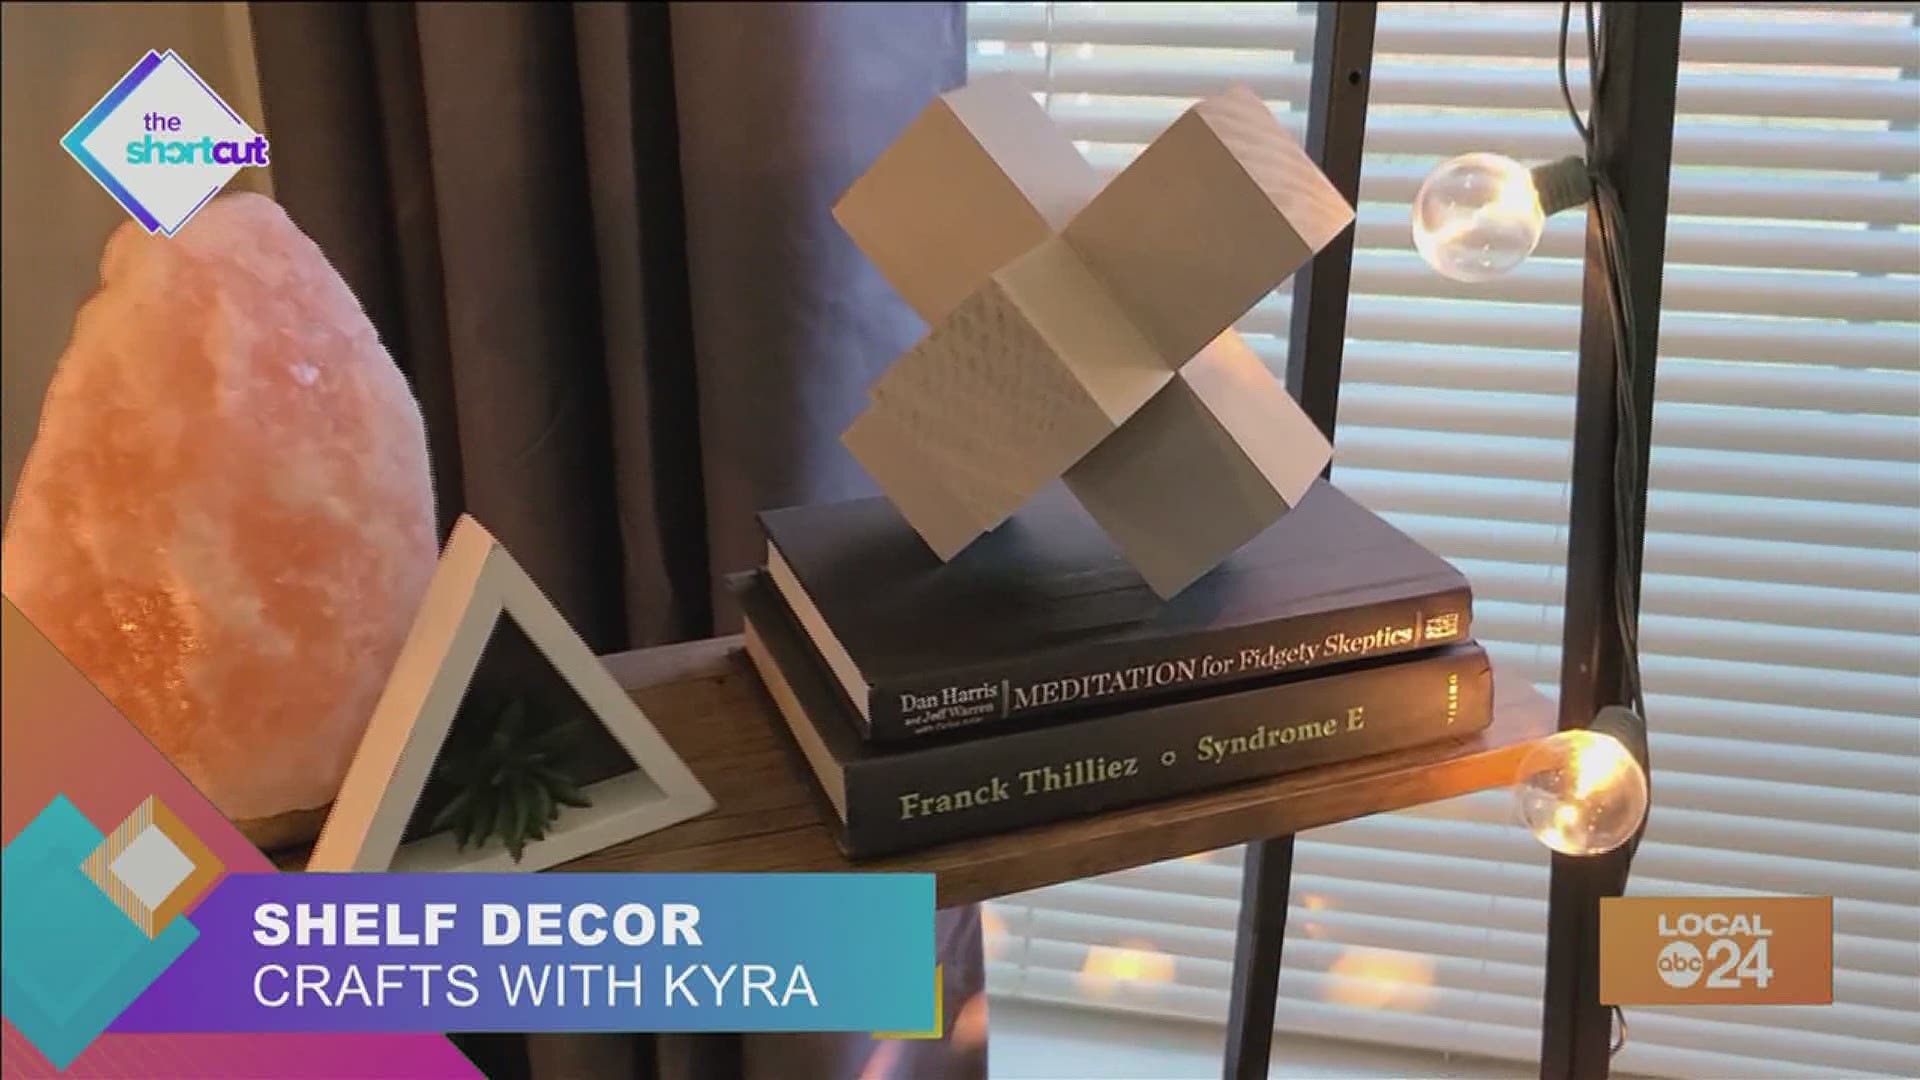 If you're a math and/or modern art enthusiast looking to showcase your love for minimalism without breaking the bank, check out Kyra Black's DIY shelf décor how-to!